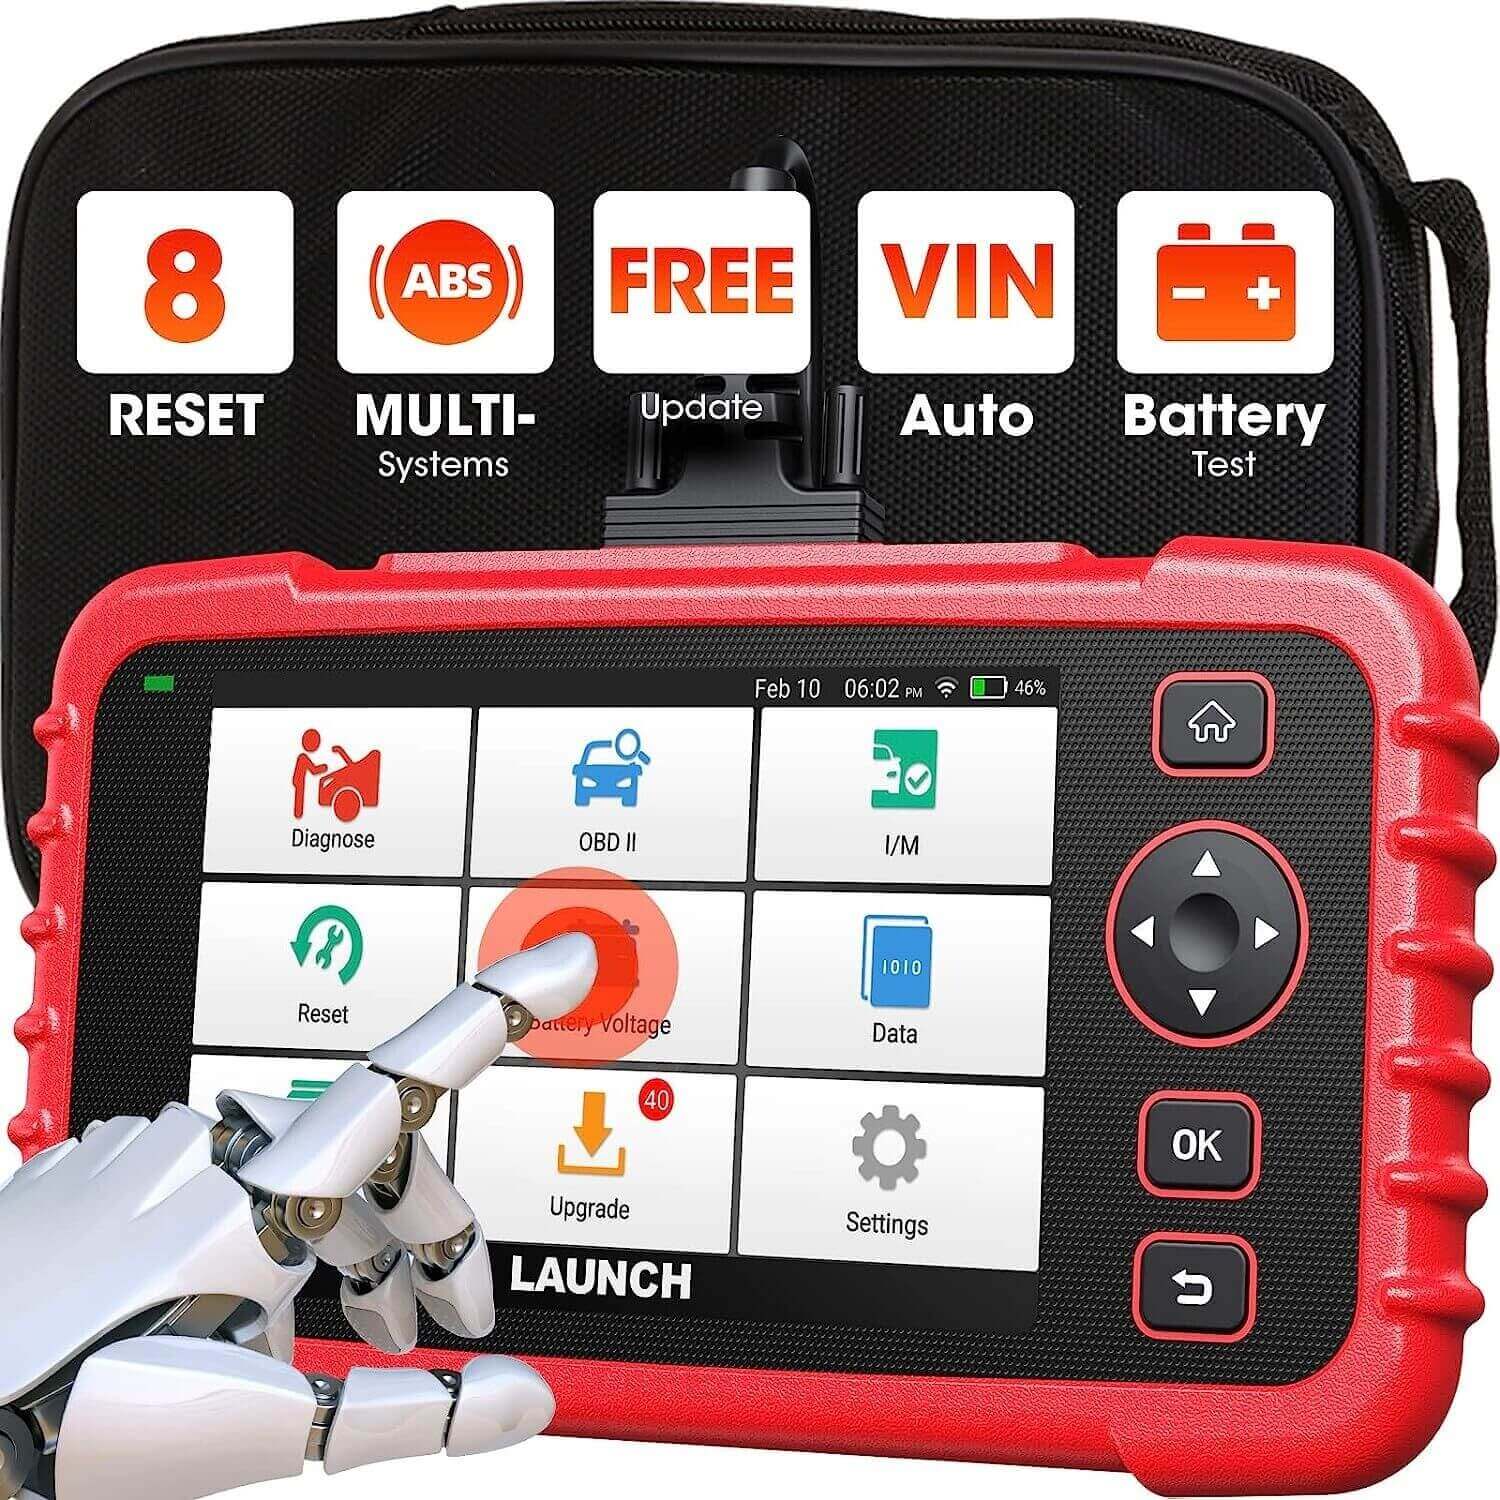 LAUNCH OBD2 Scanner CRP123E Read Reset Engine/Transmission/ABS/Airbag Car  Code Reader - Launch X431 Mall